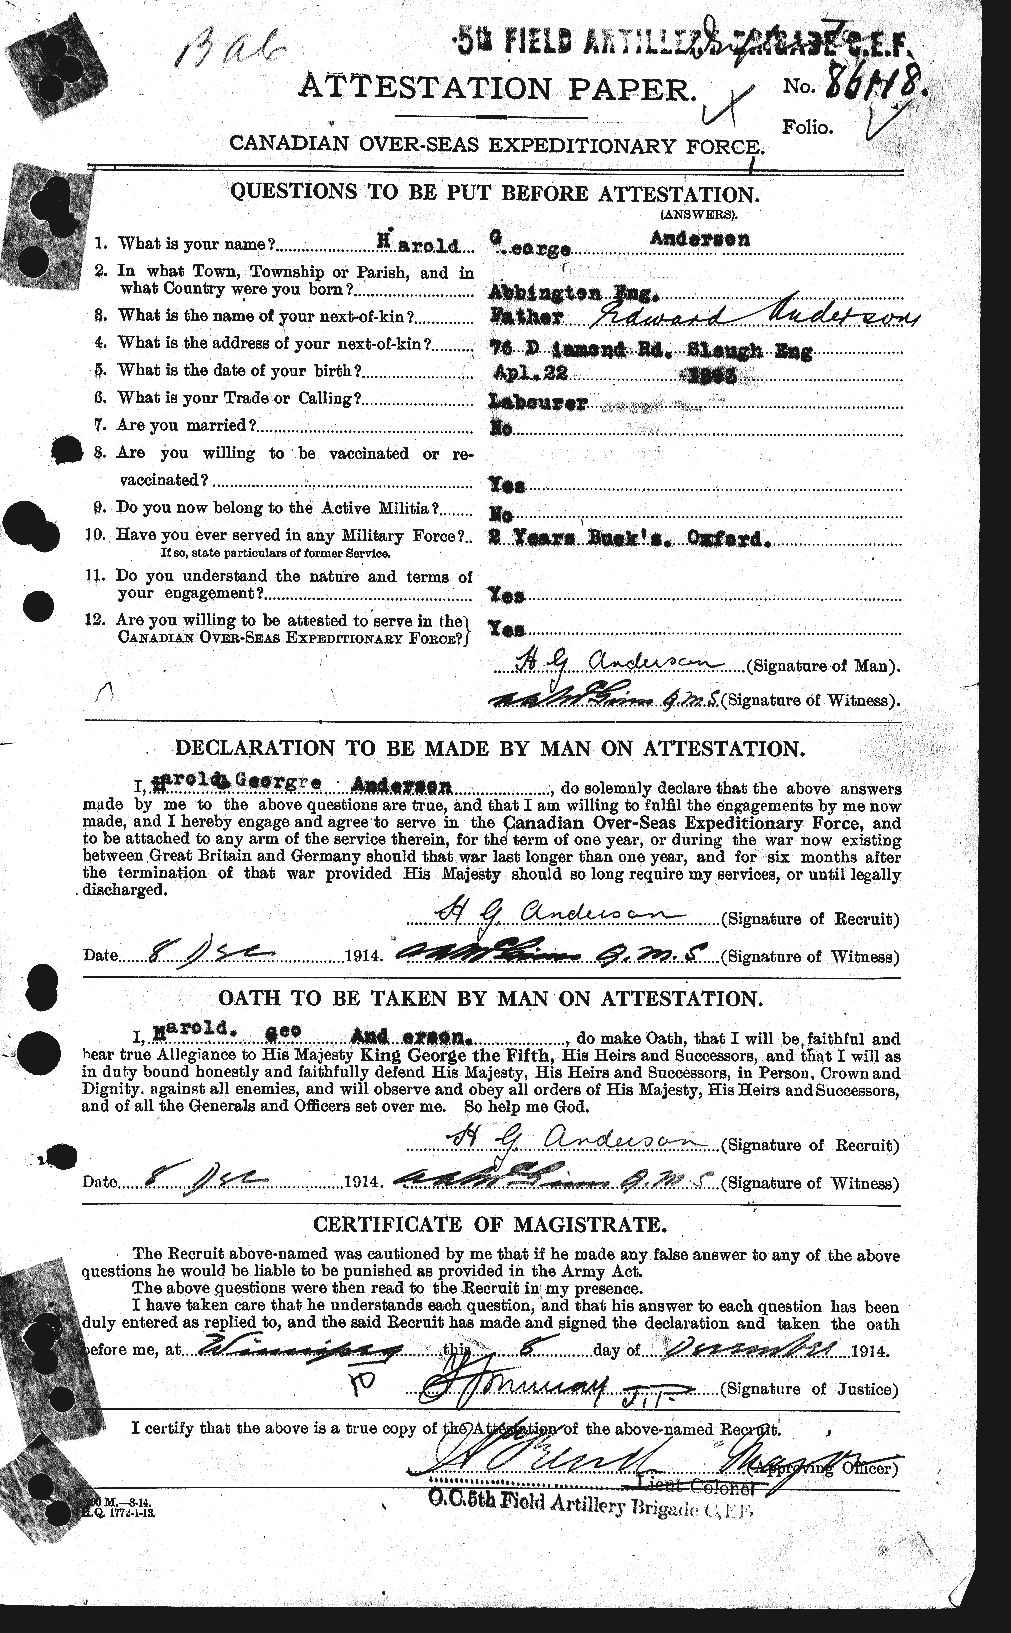 Personnel Records of the First World War - CEF 213289a